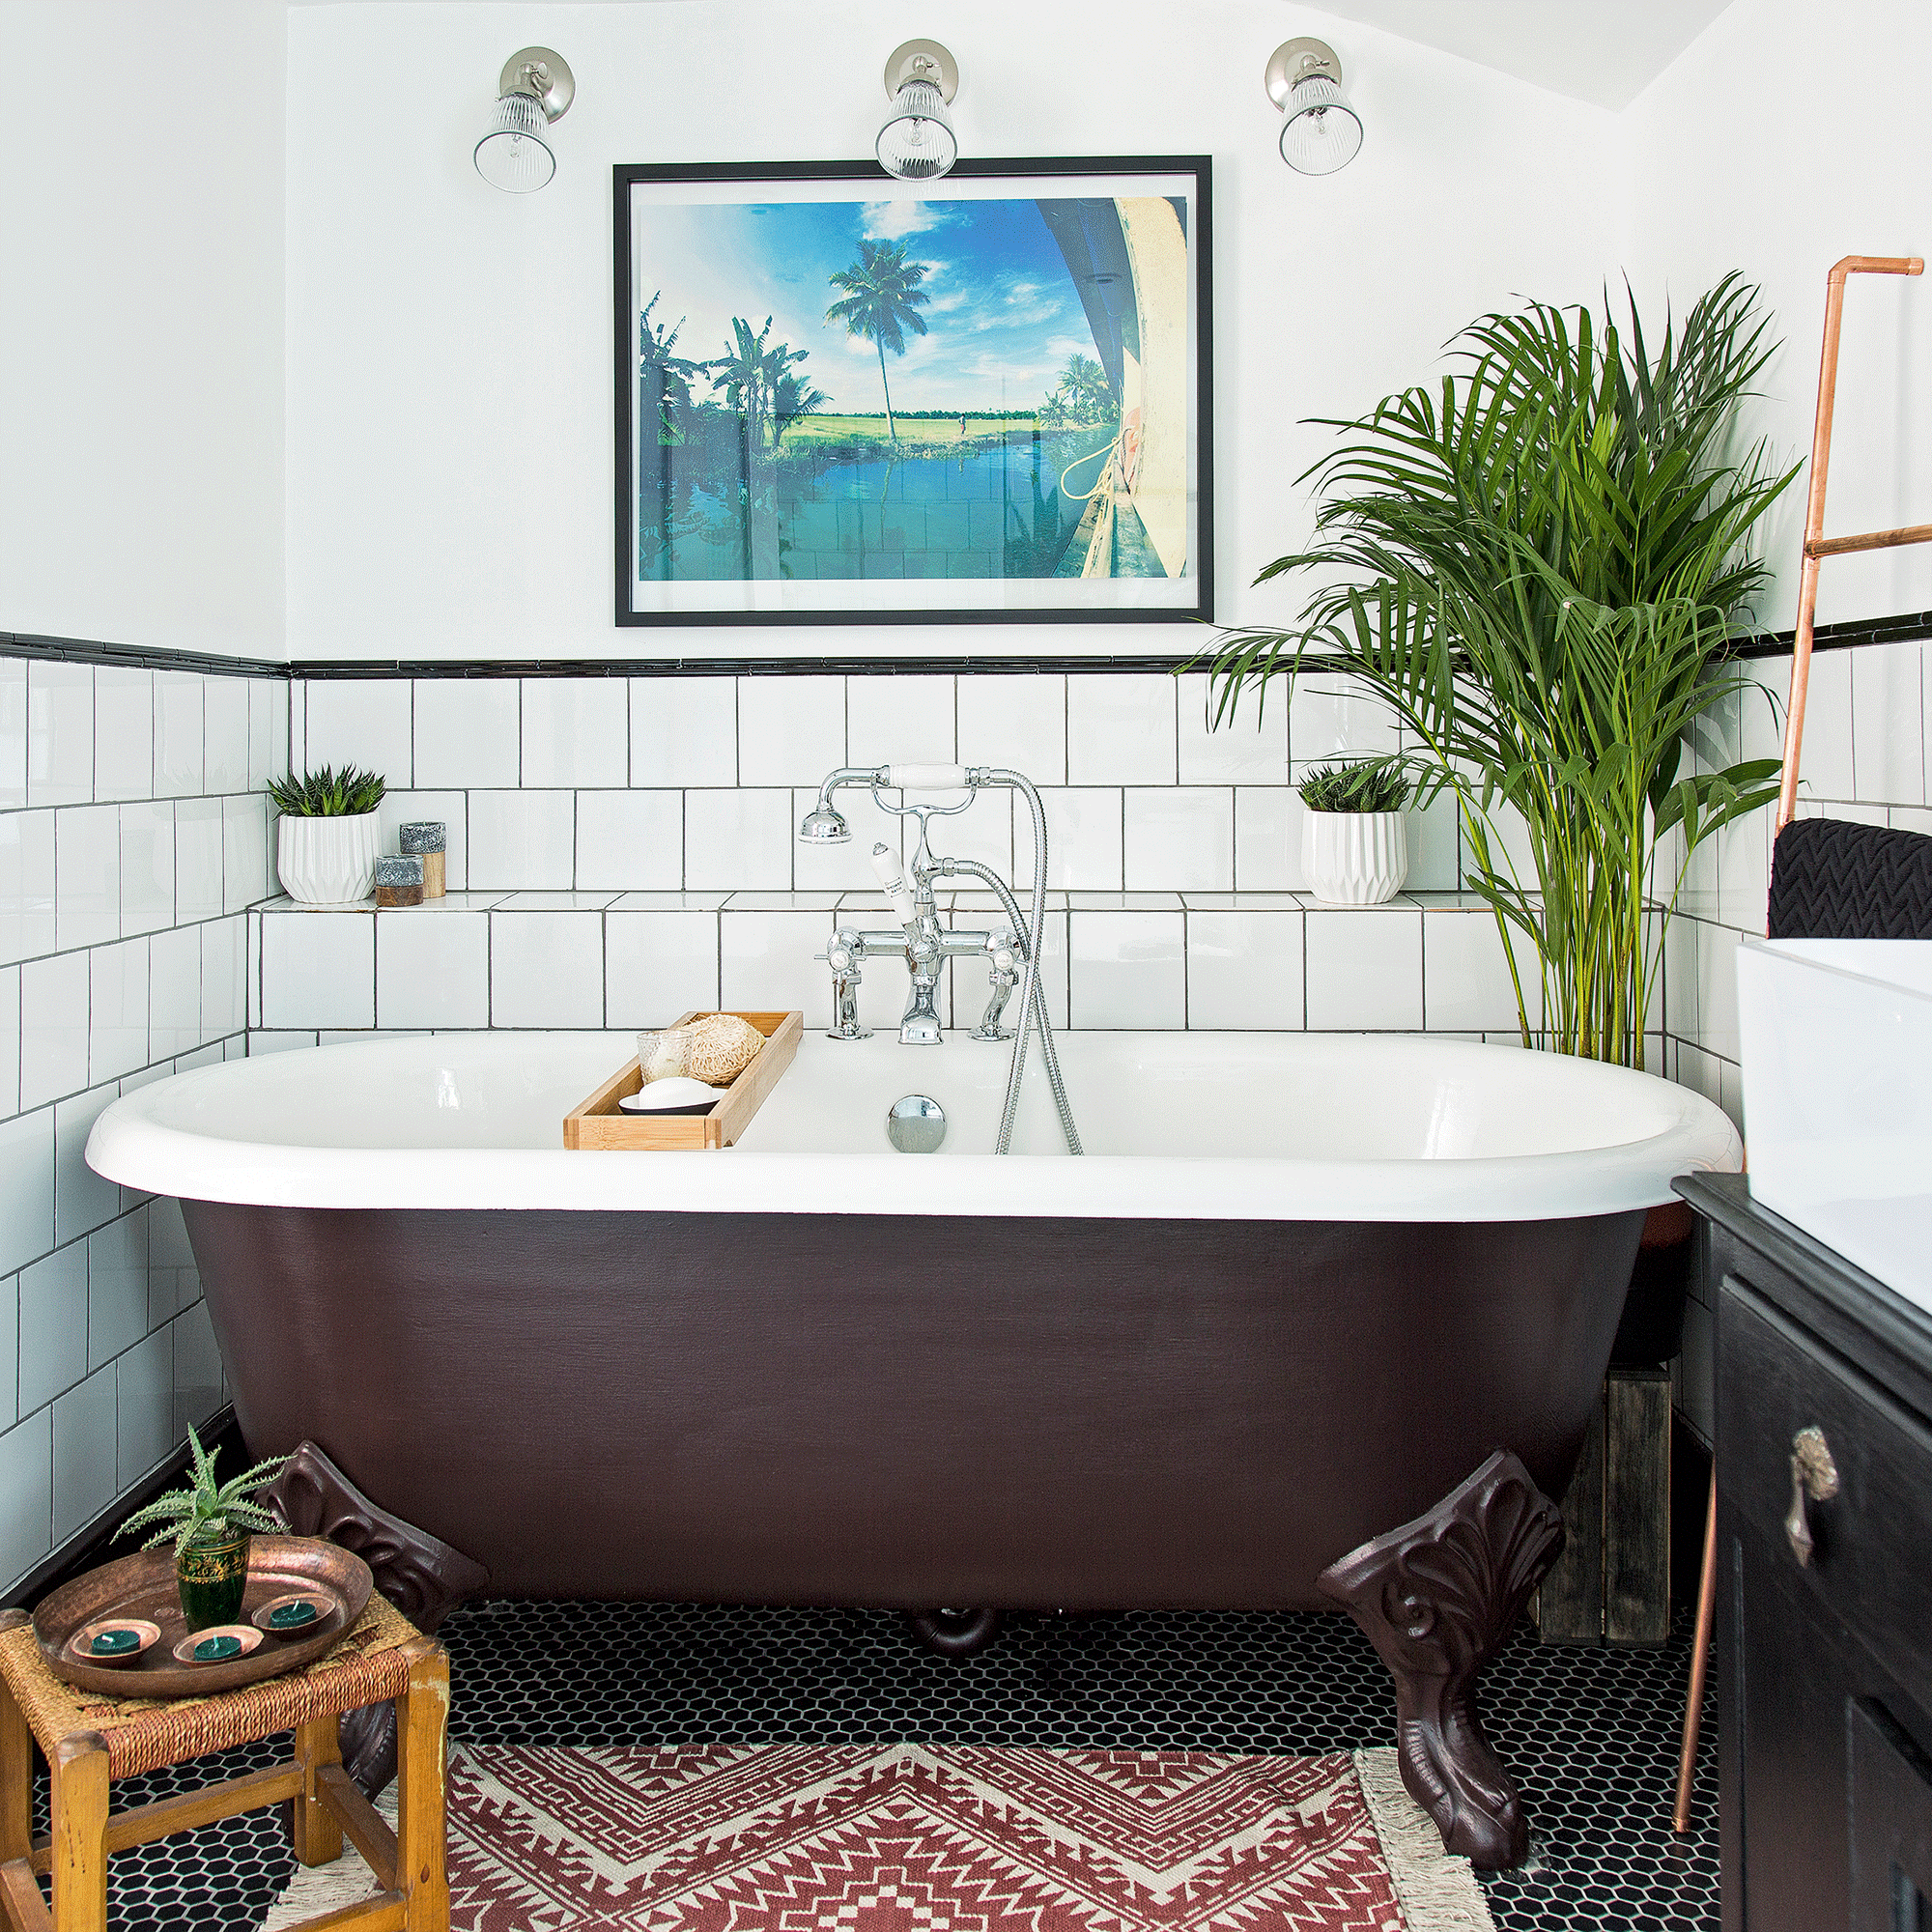 Red bathtub and white tiles with plant